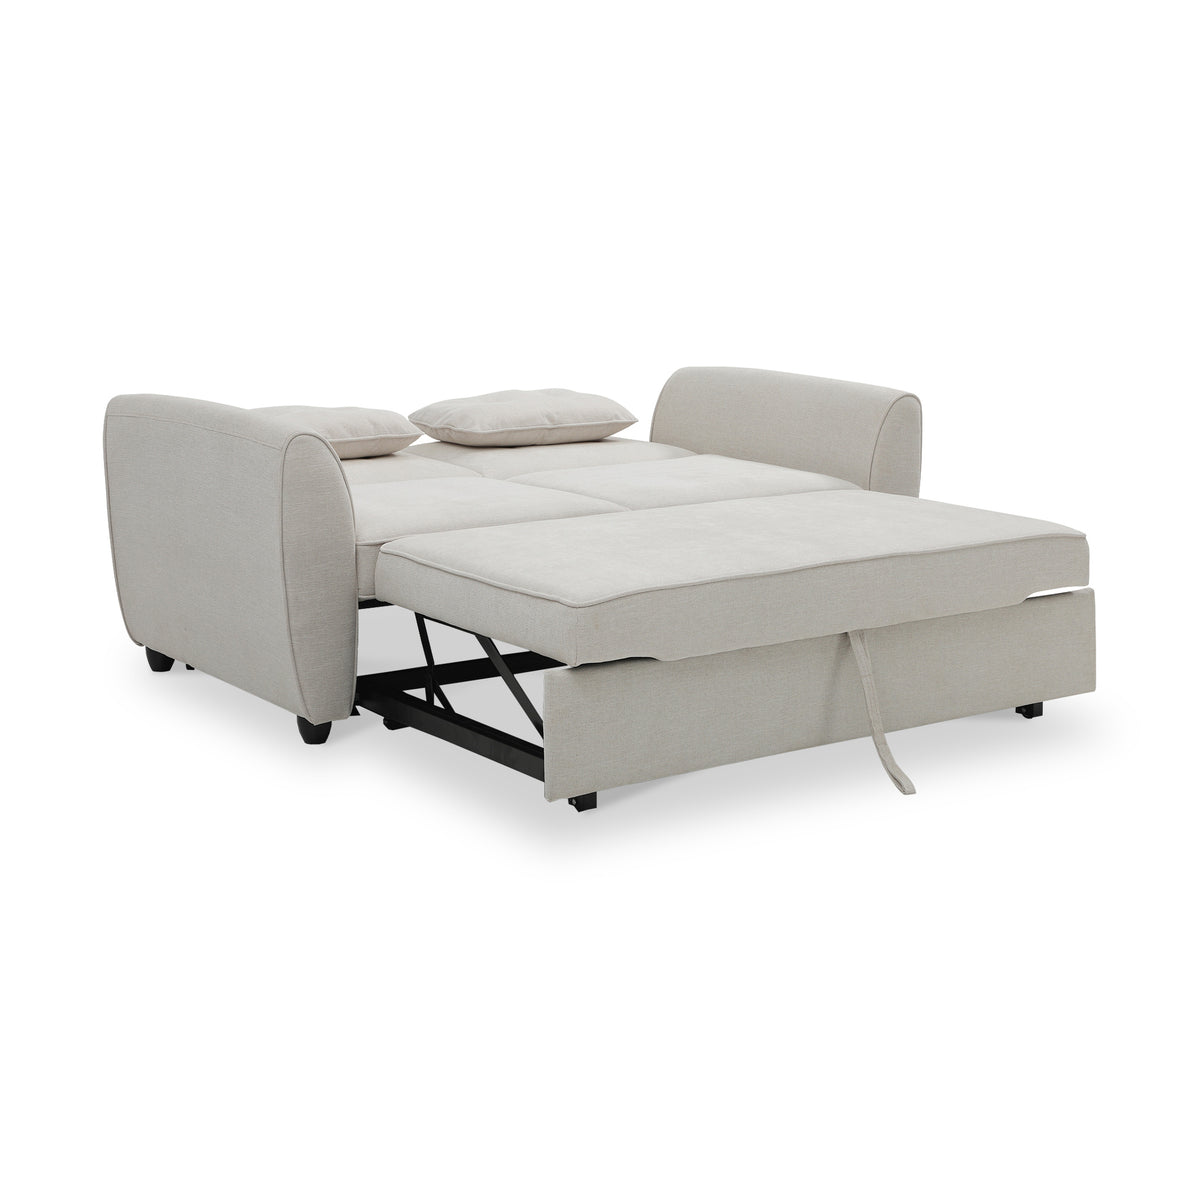 Willette Natural 2 Seater Pop Up Sofa Bed